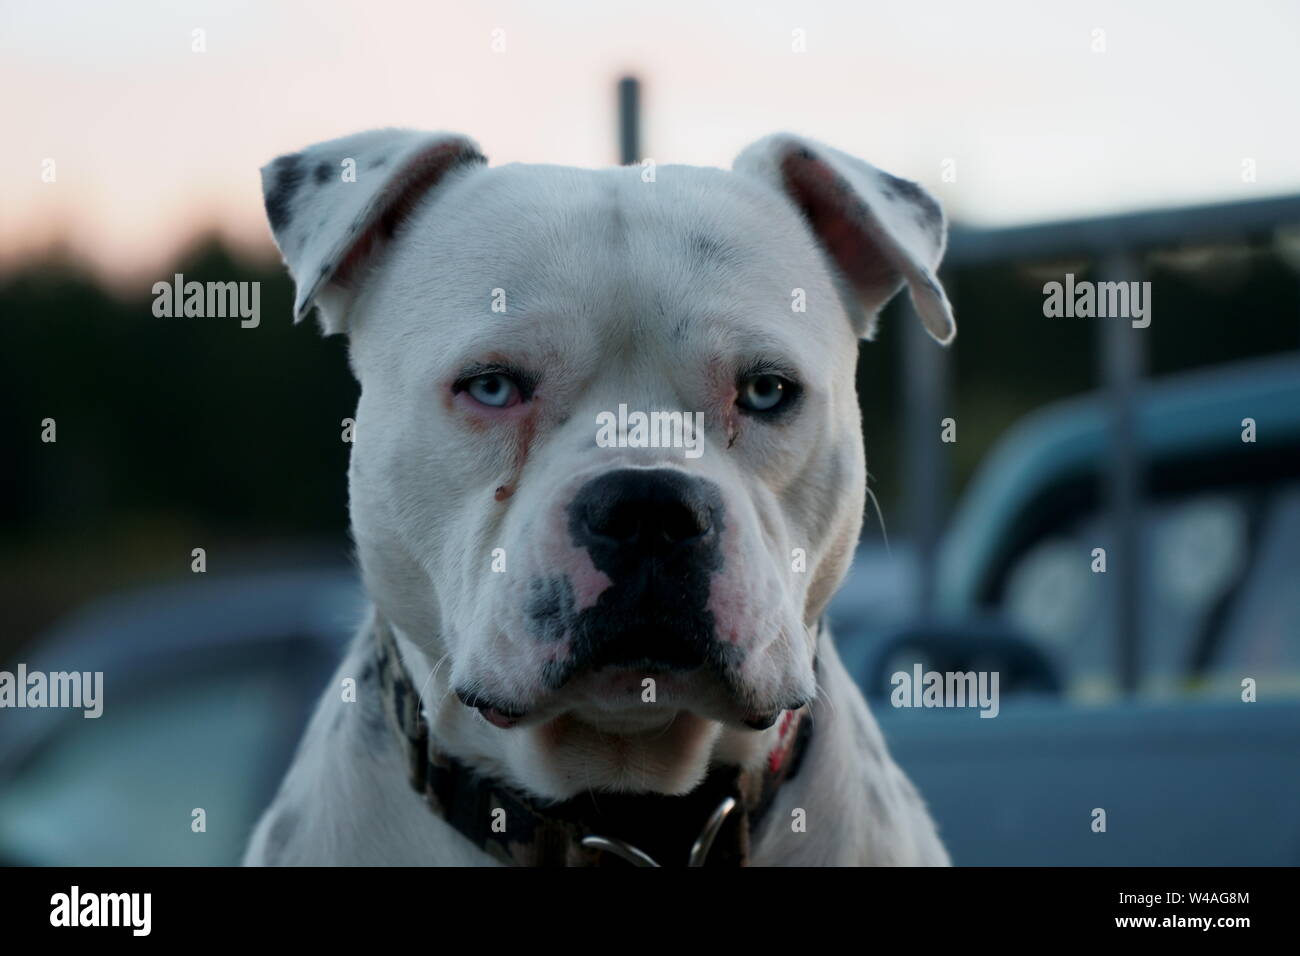 White pit bull dog with blue eyes staring at camera in front of a bokeh background Stock Photo